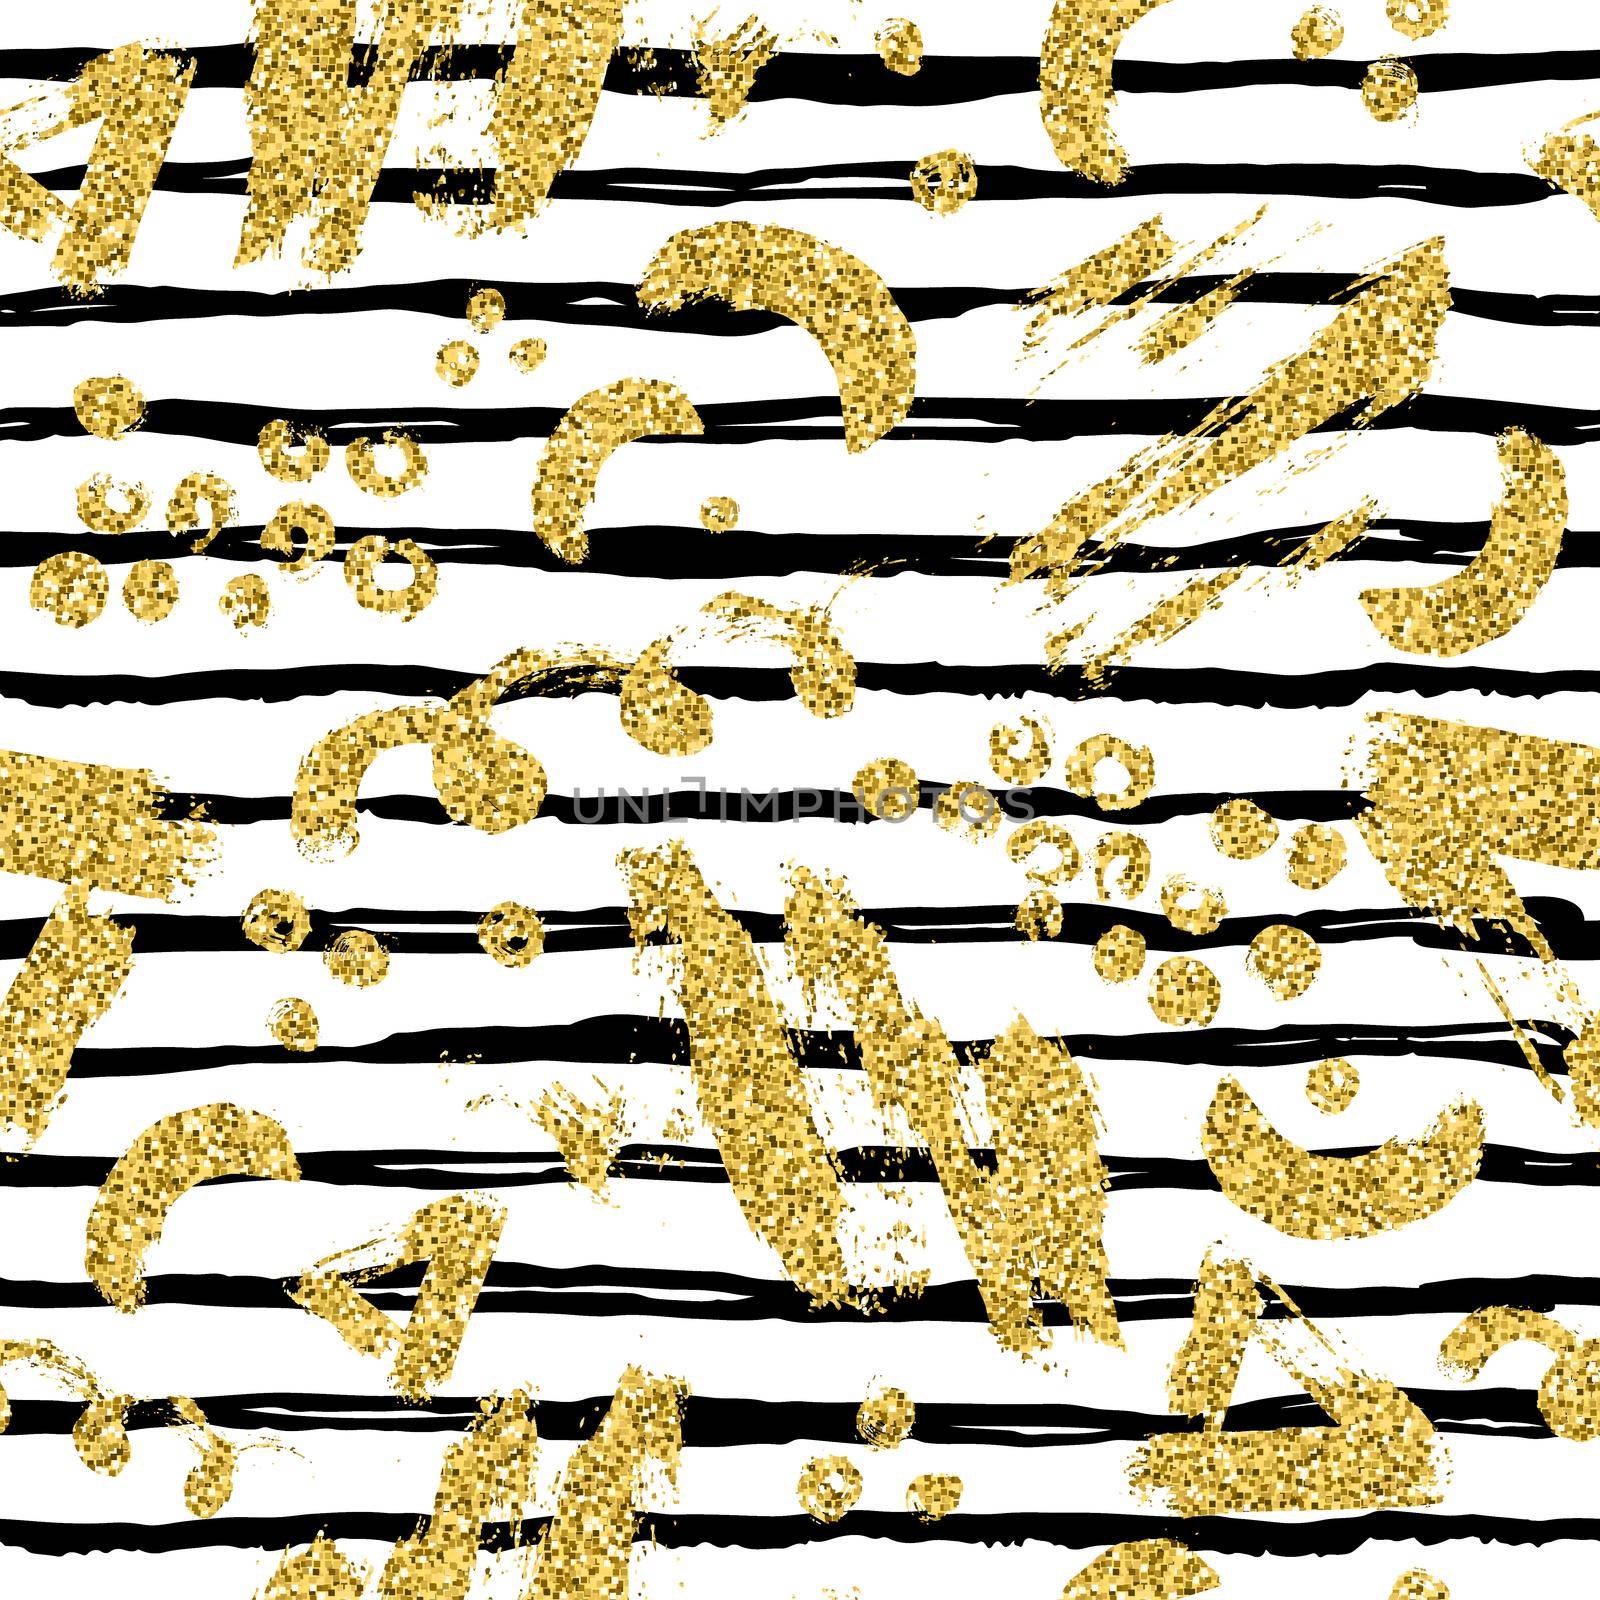 Modern seamless pattern with gold glitter brush stripe, blot and spot. Golden, black color on white background. Hand painted metallic texture. Shiny spark elements. Fashion modern style. Repeat print. by DesignAB